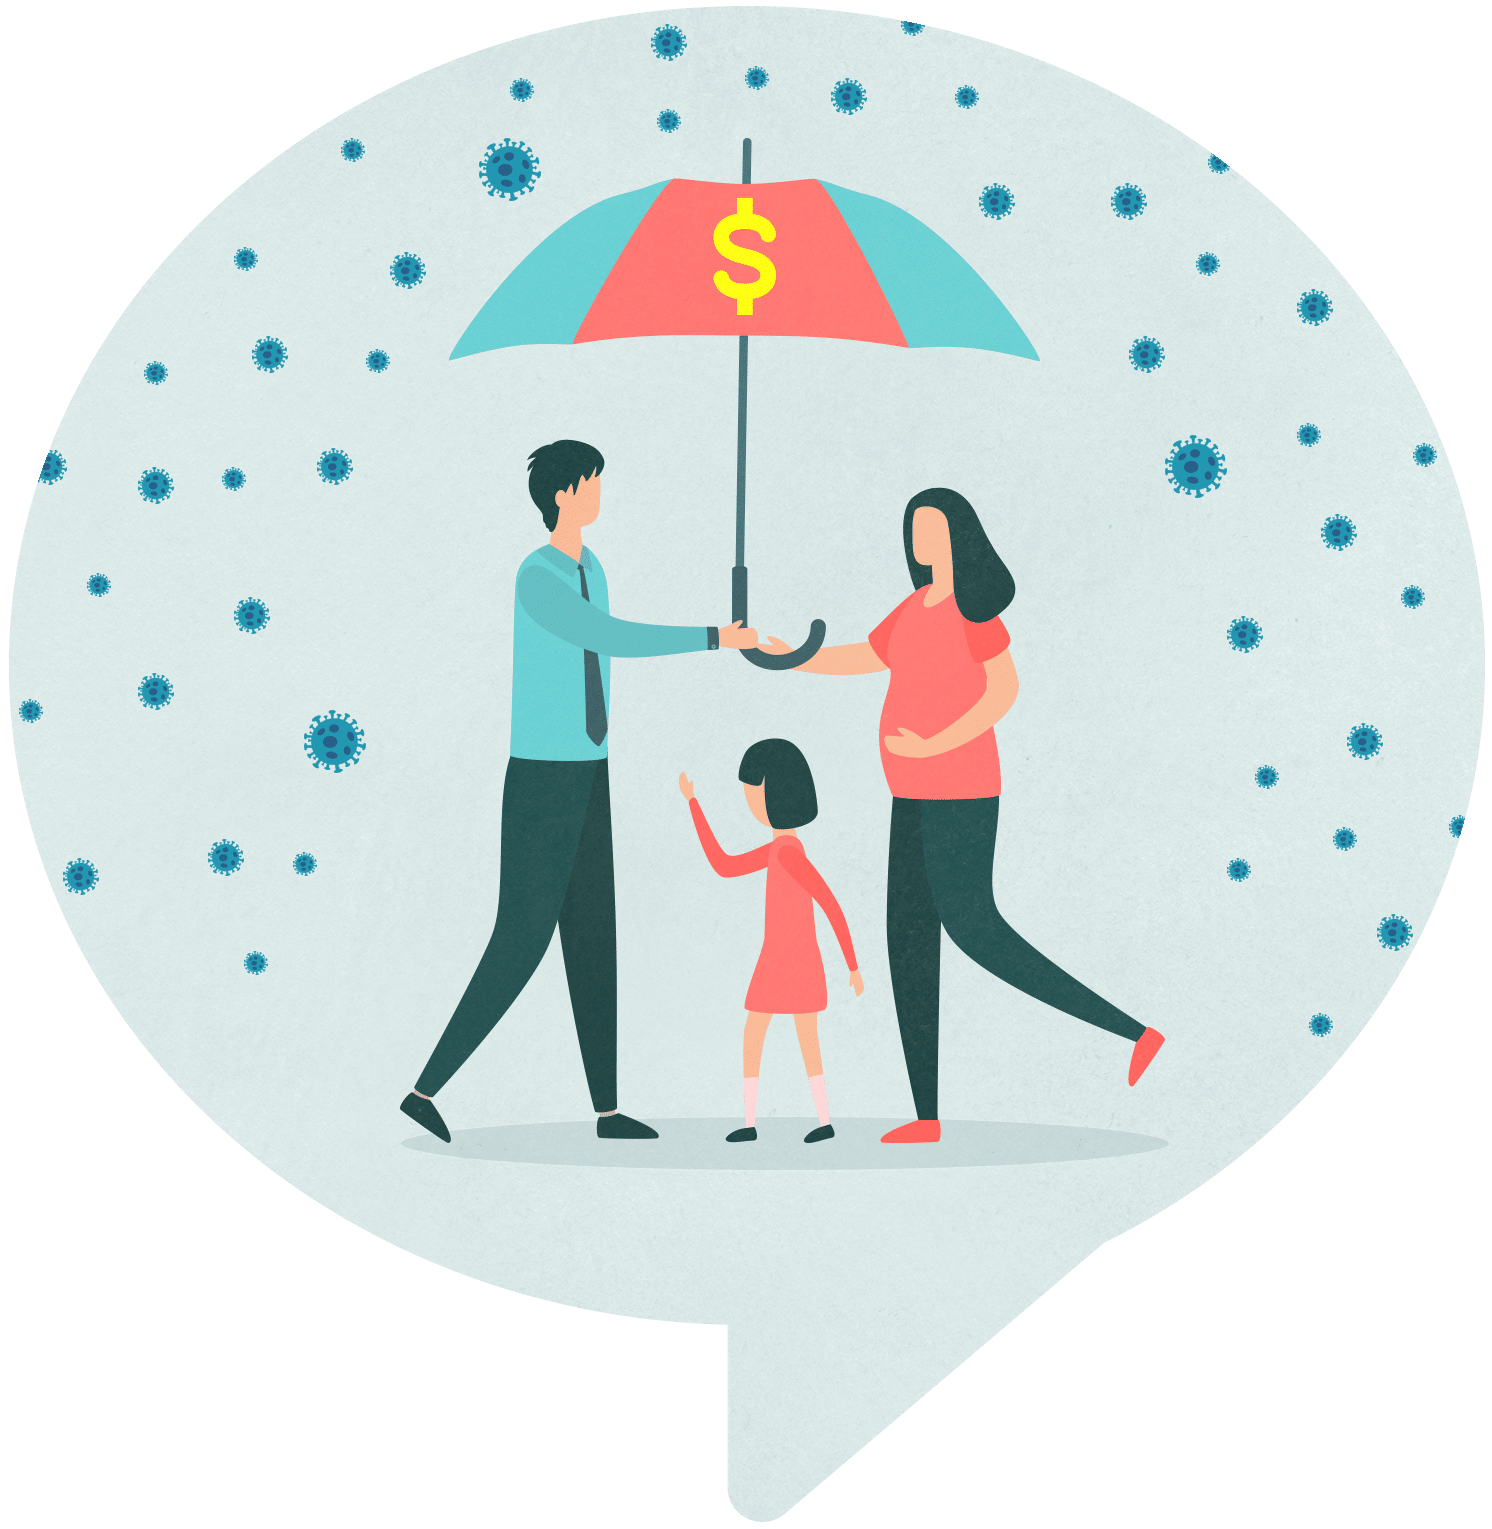 illustration of family holding umbrella with a dollar sign